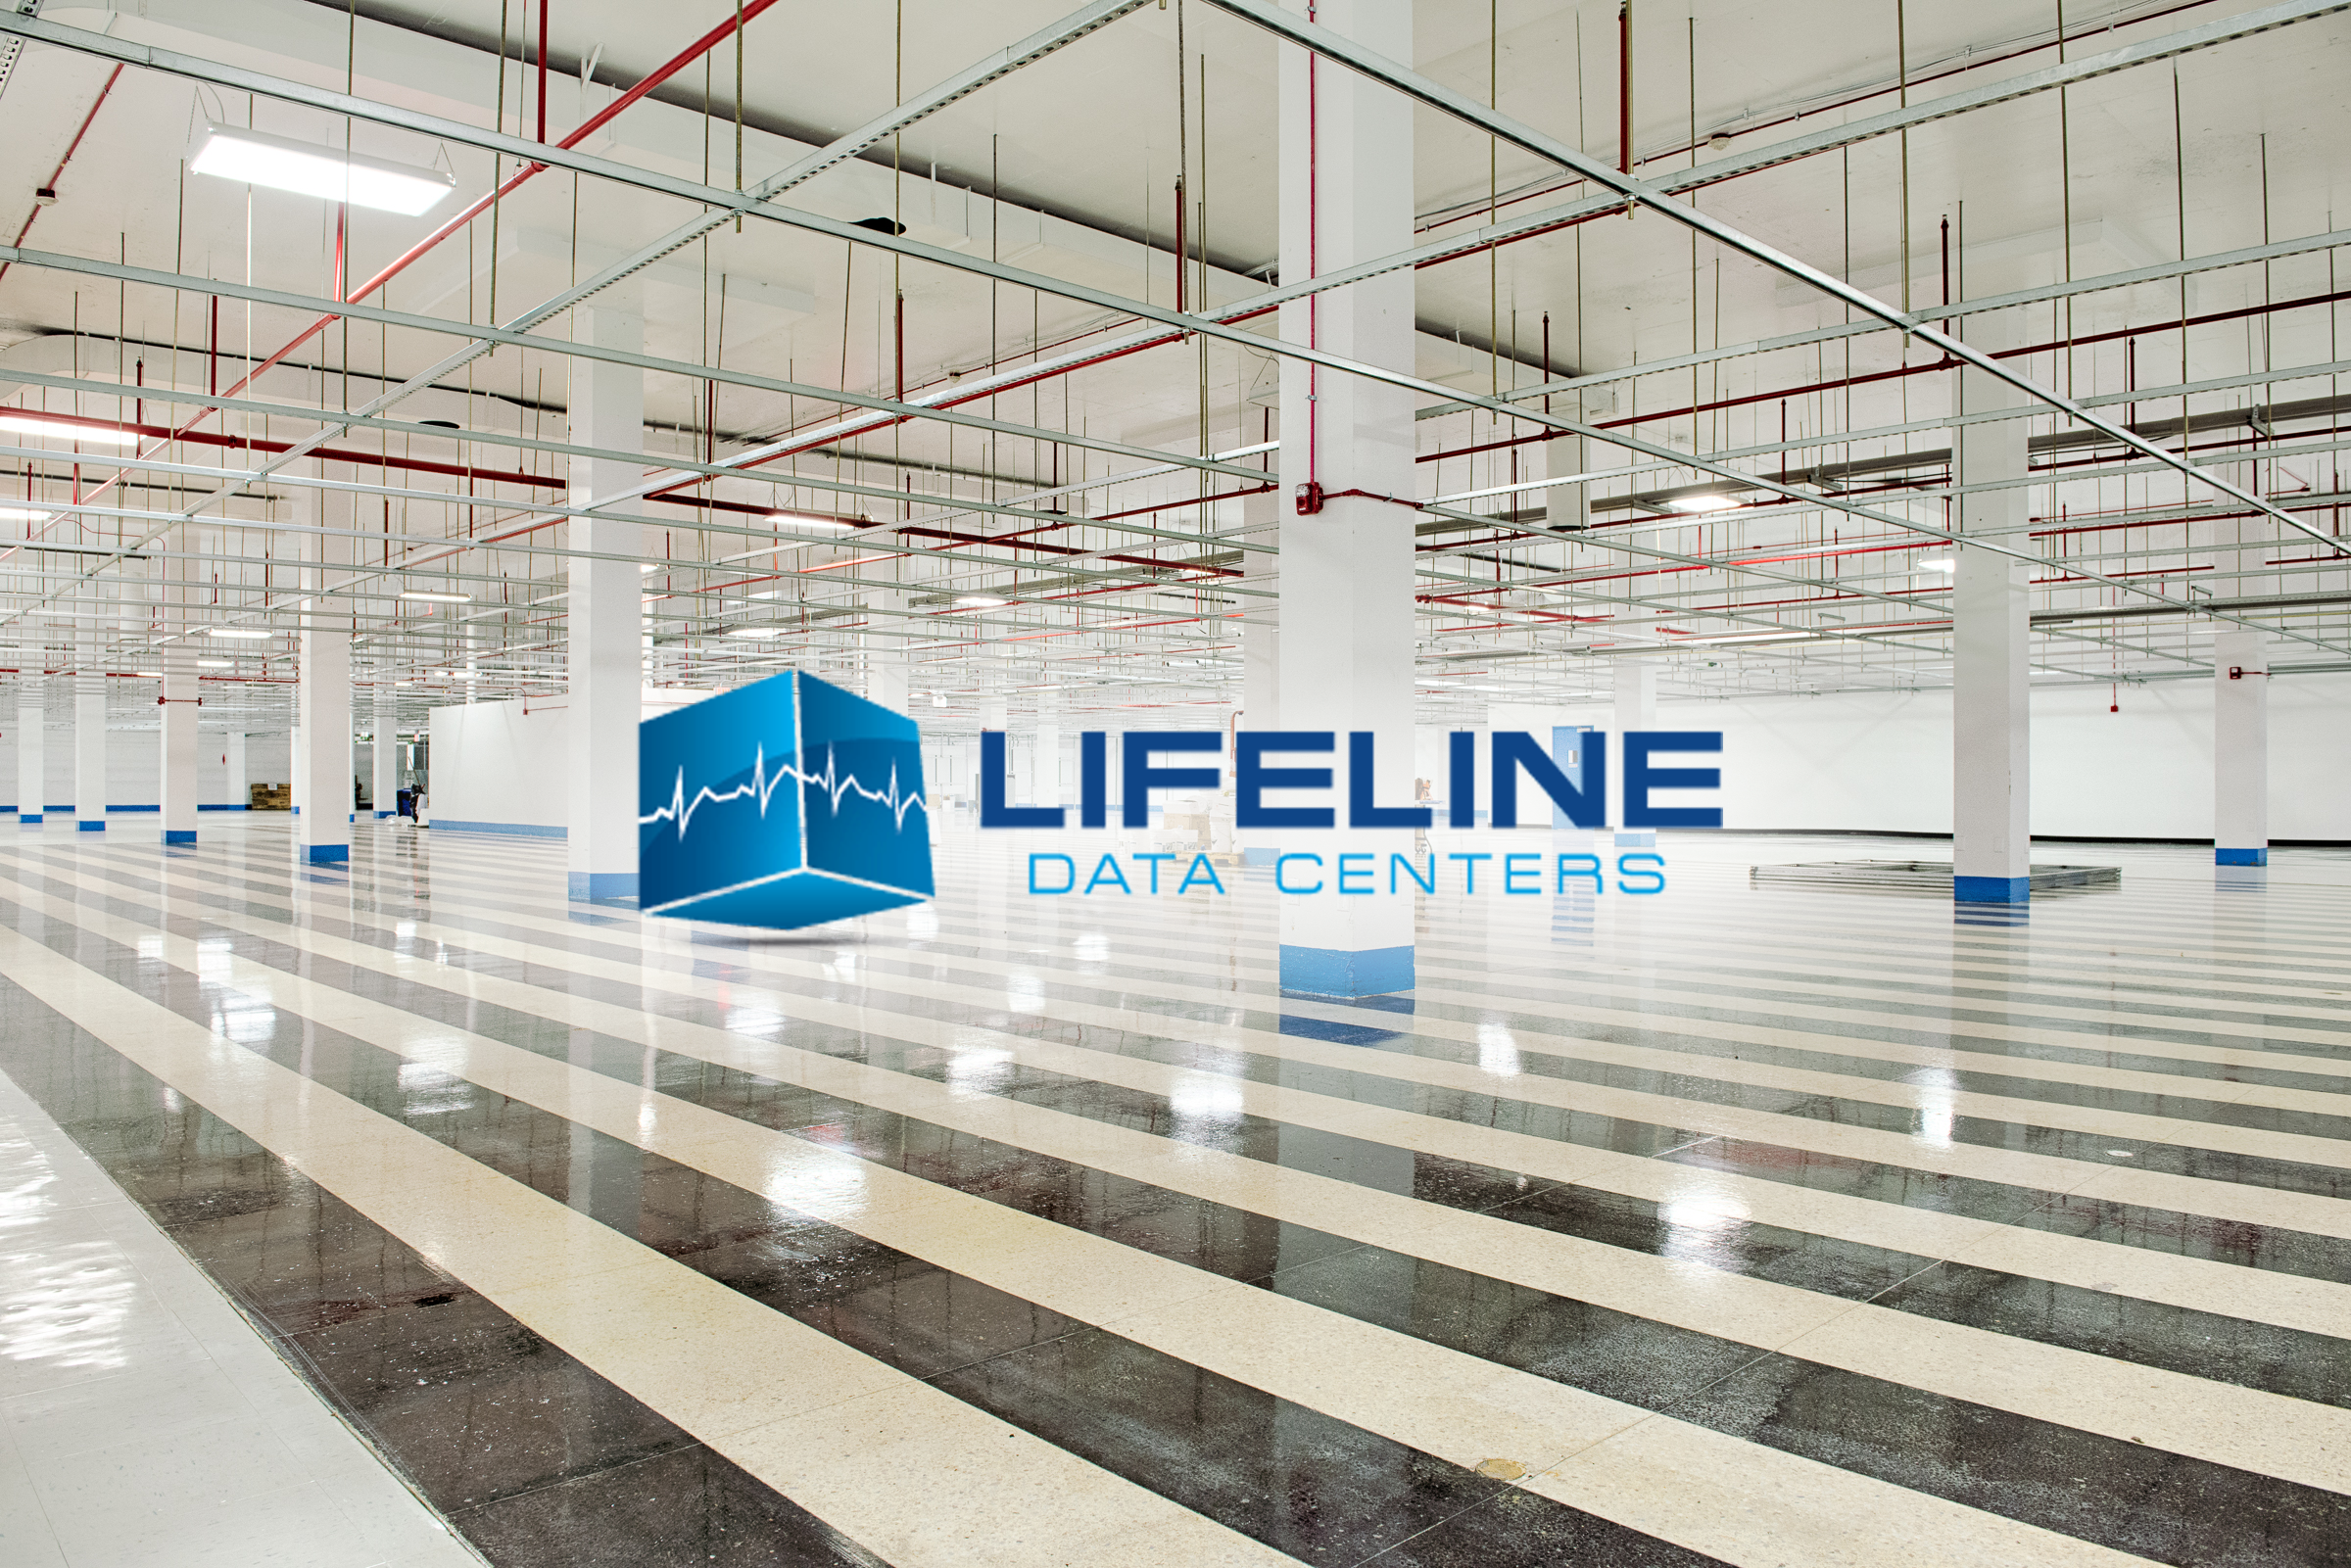 Lifeline Data Centers is a leader in data center security standards, compliance, uptime, and innovation. In 2016, they started construction on their Ft. Wayne facility, set to open in early 2021.